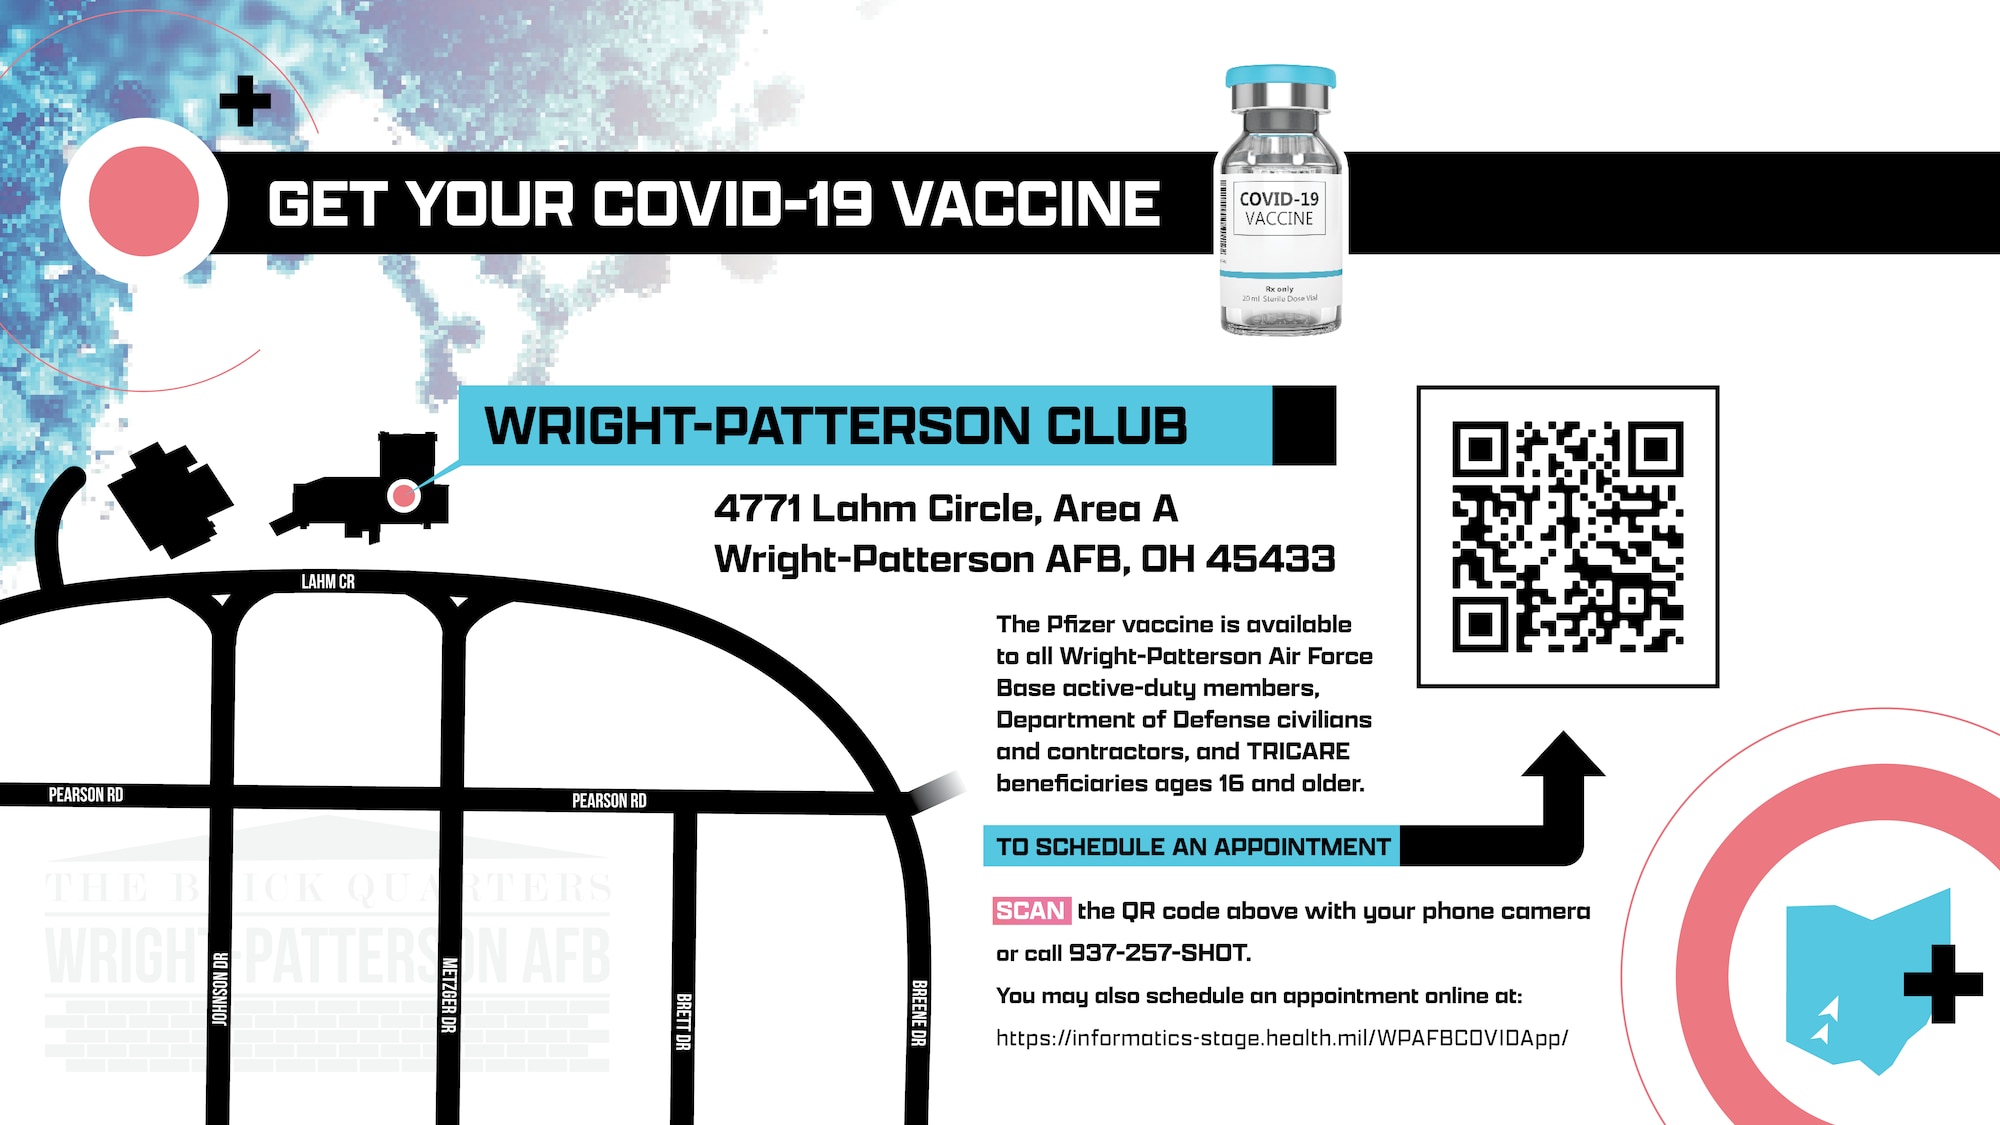 The Pfizer vaccine is available to all Wright-Patterson Air force Base active-duty members, Department of Defense civilians and contractors, and TRICARE beneficiaries ages 16 and older.